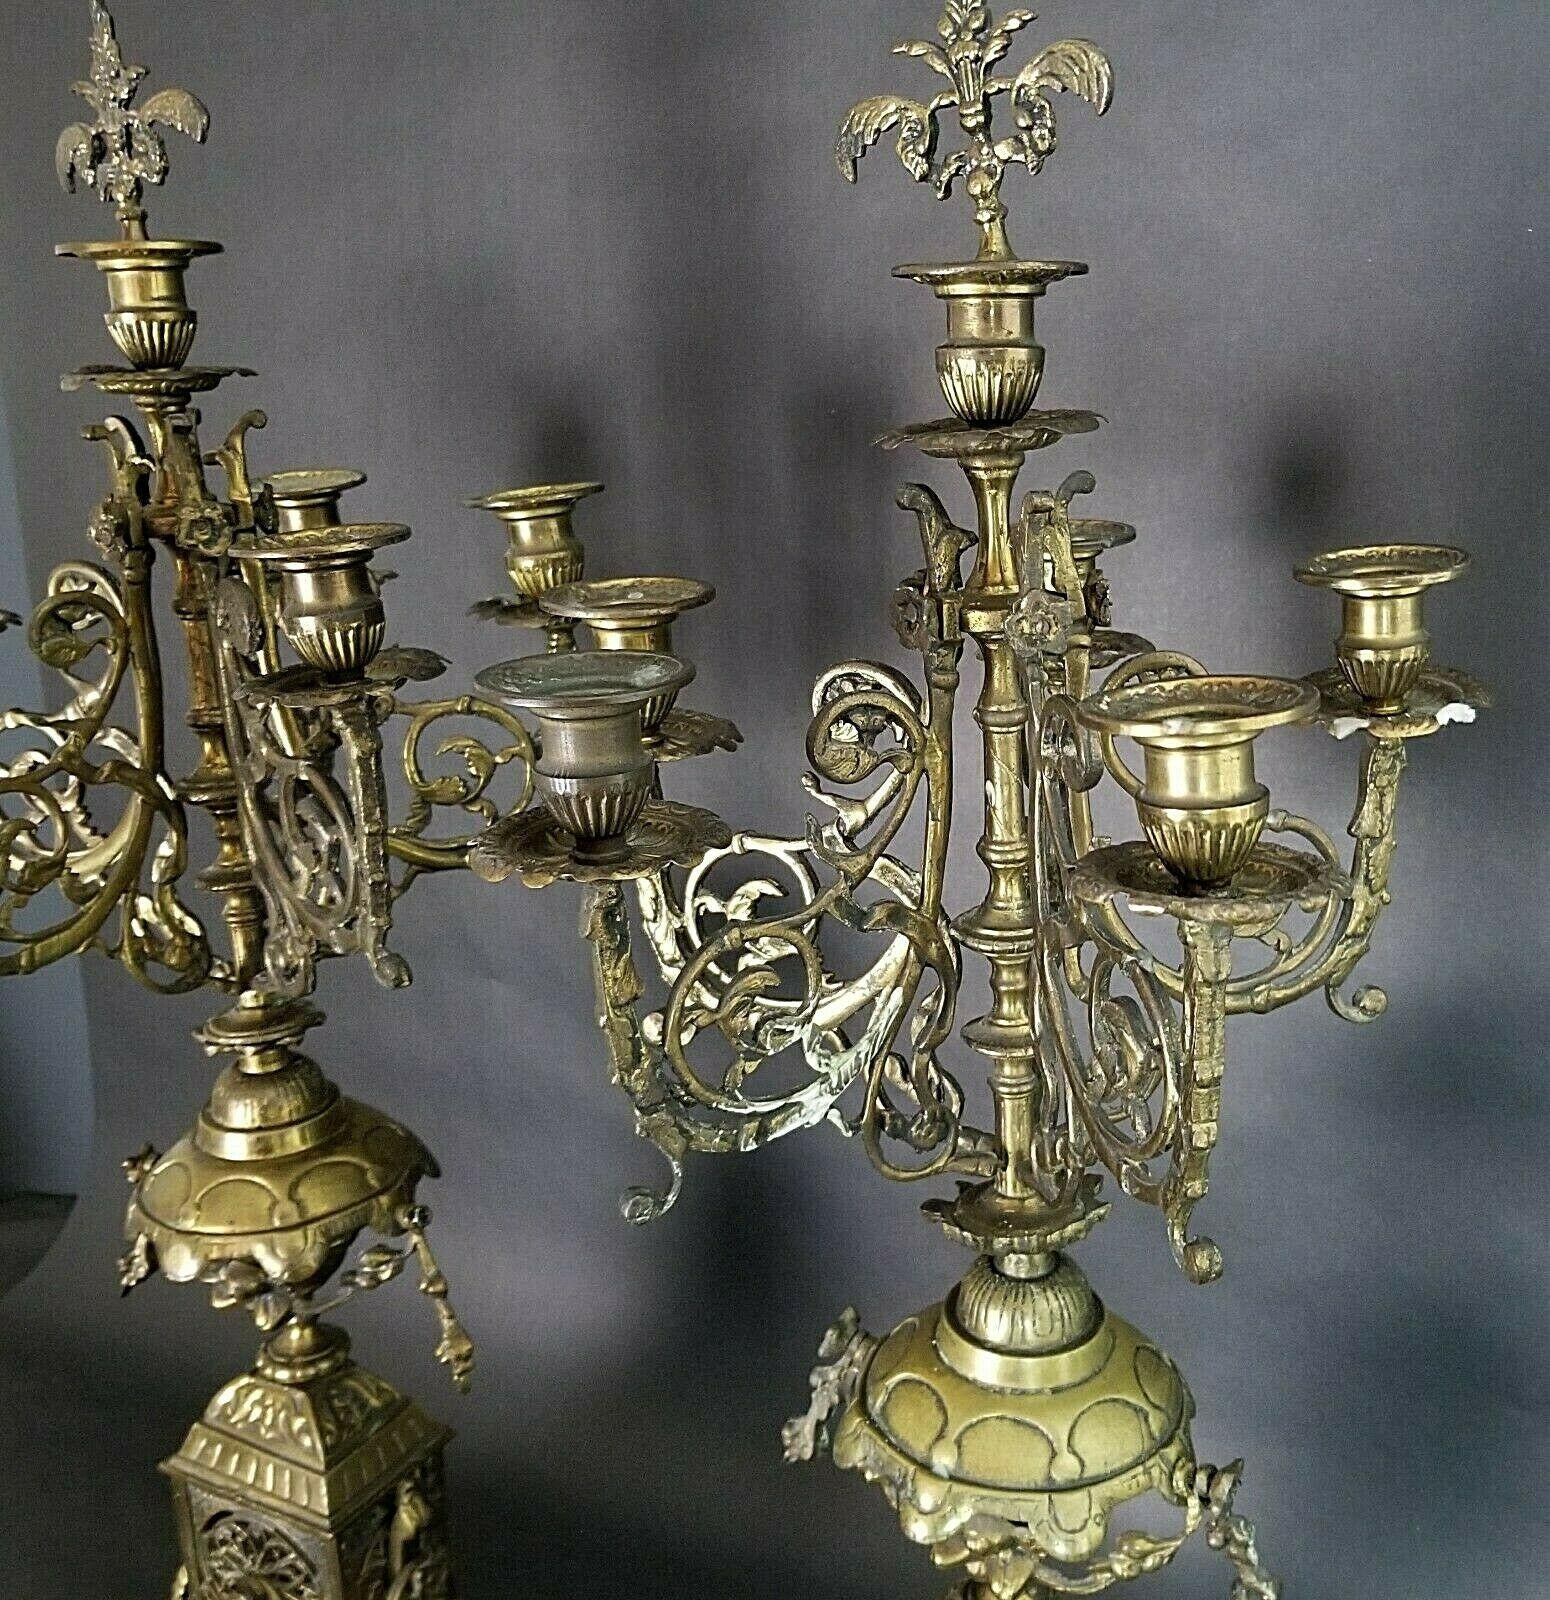 20th Century Antique Italian Ornate Bronze French Louis XV Rococo 6 Point Candelabras For Sale